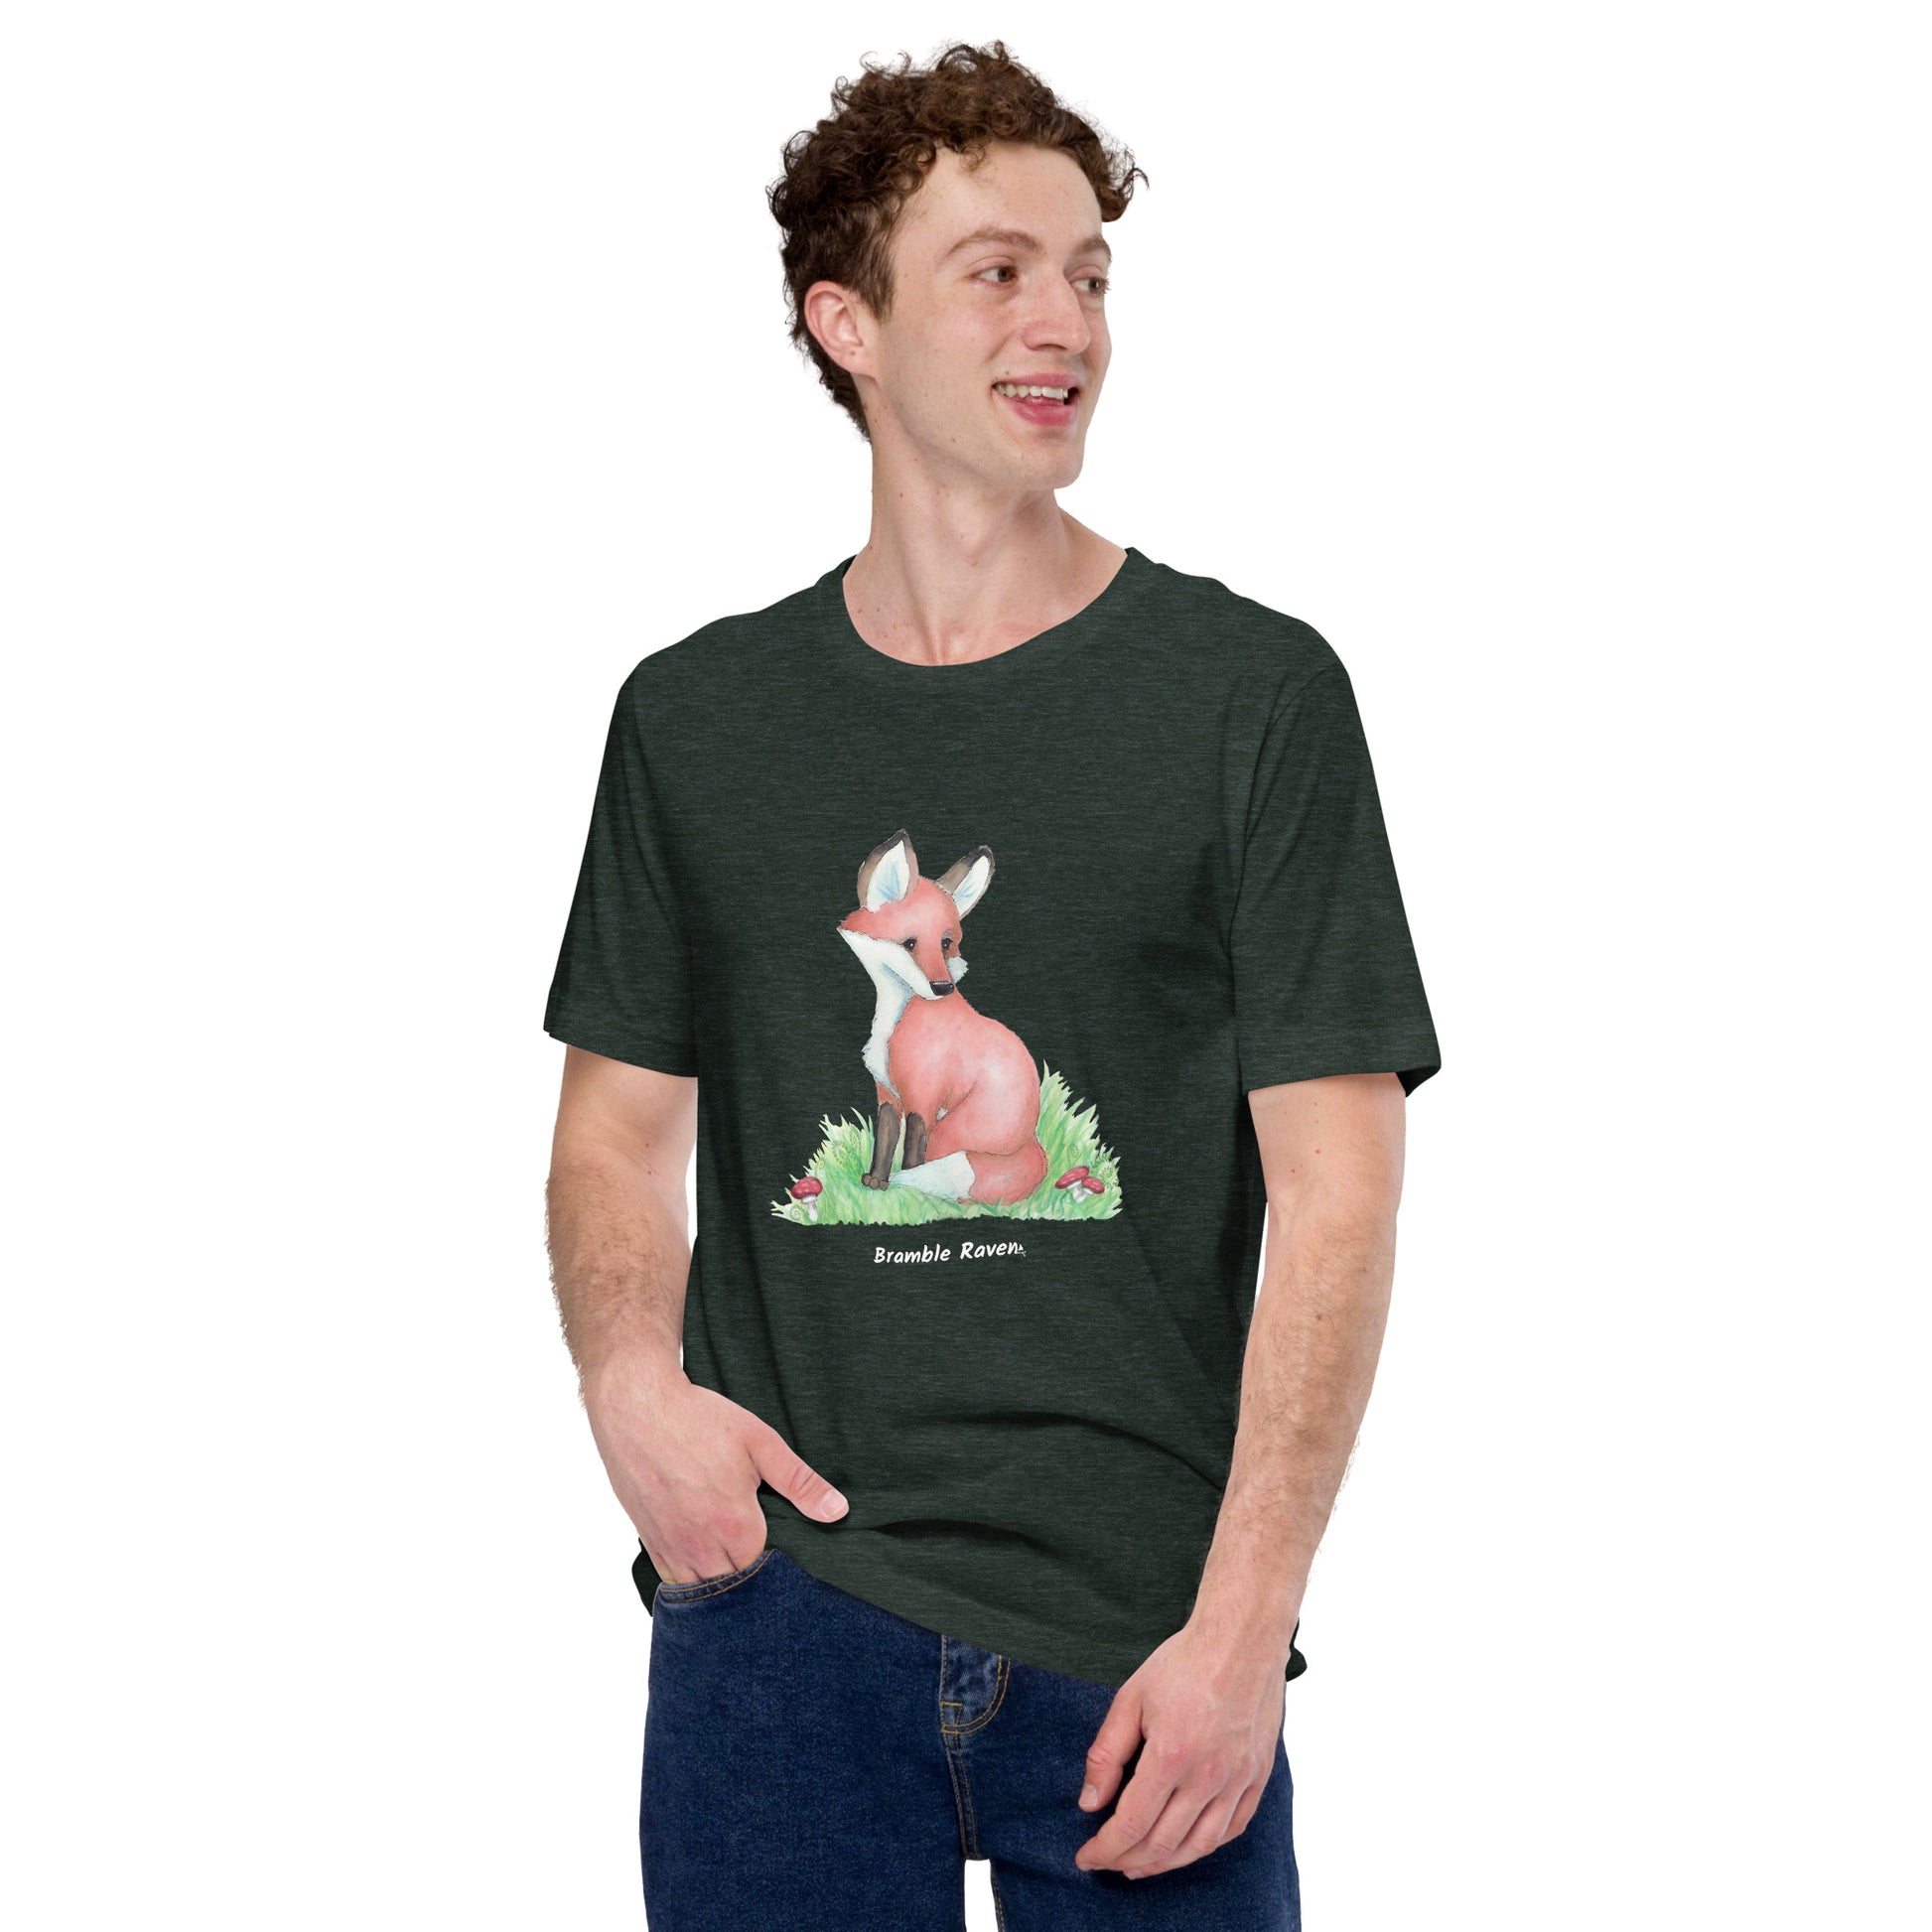 Unisex  heather forest green colored forest fox t-shirt. Features watercolor print of a fox in the grass surrounded by mushrooms and ferns. Shown on male model.